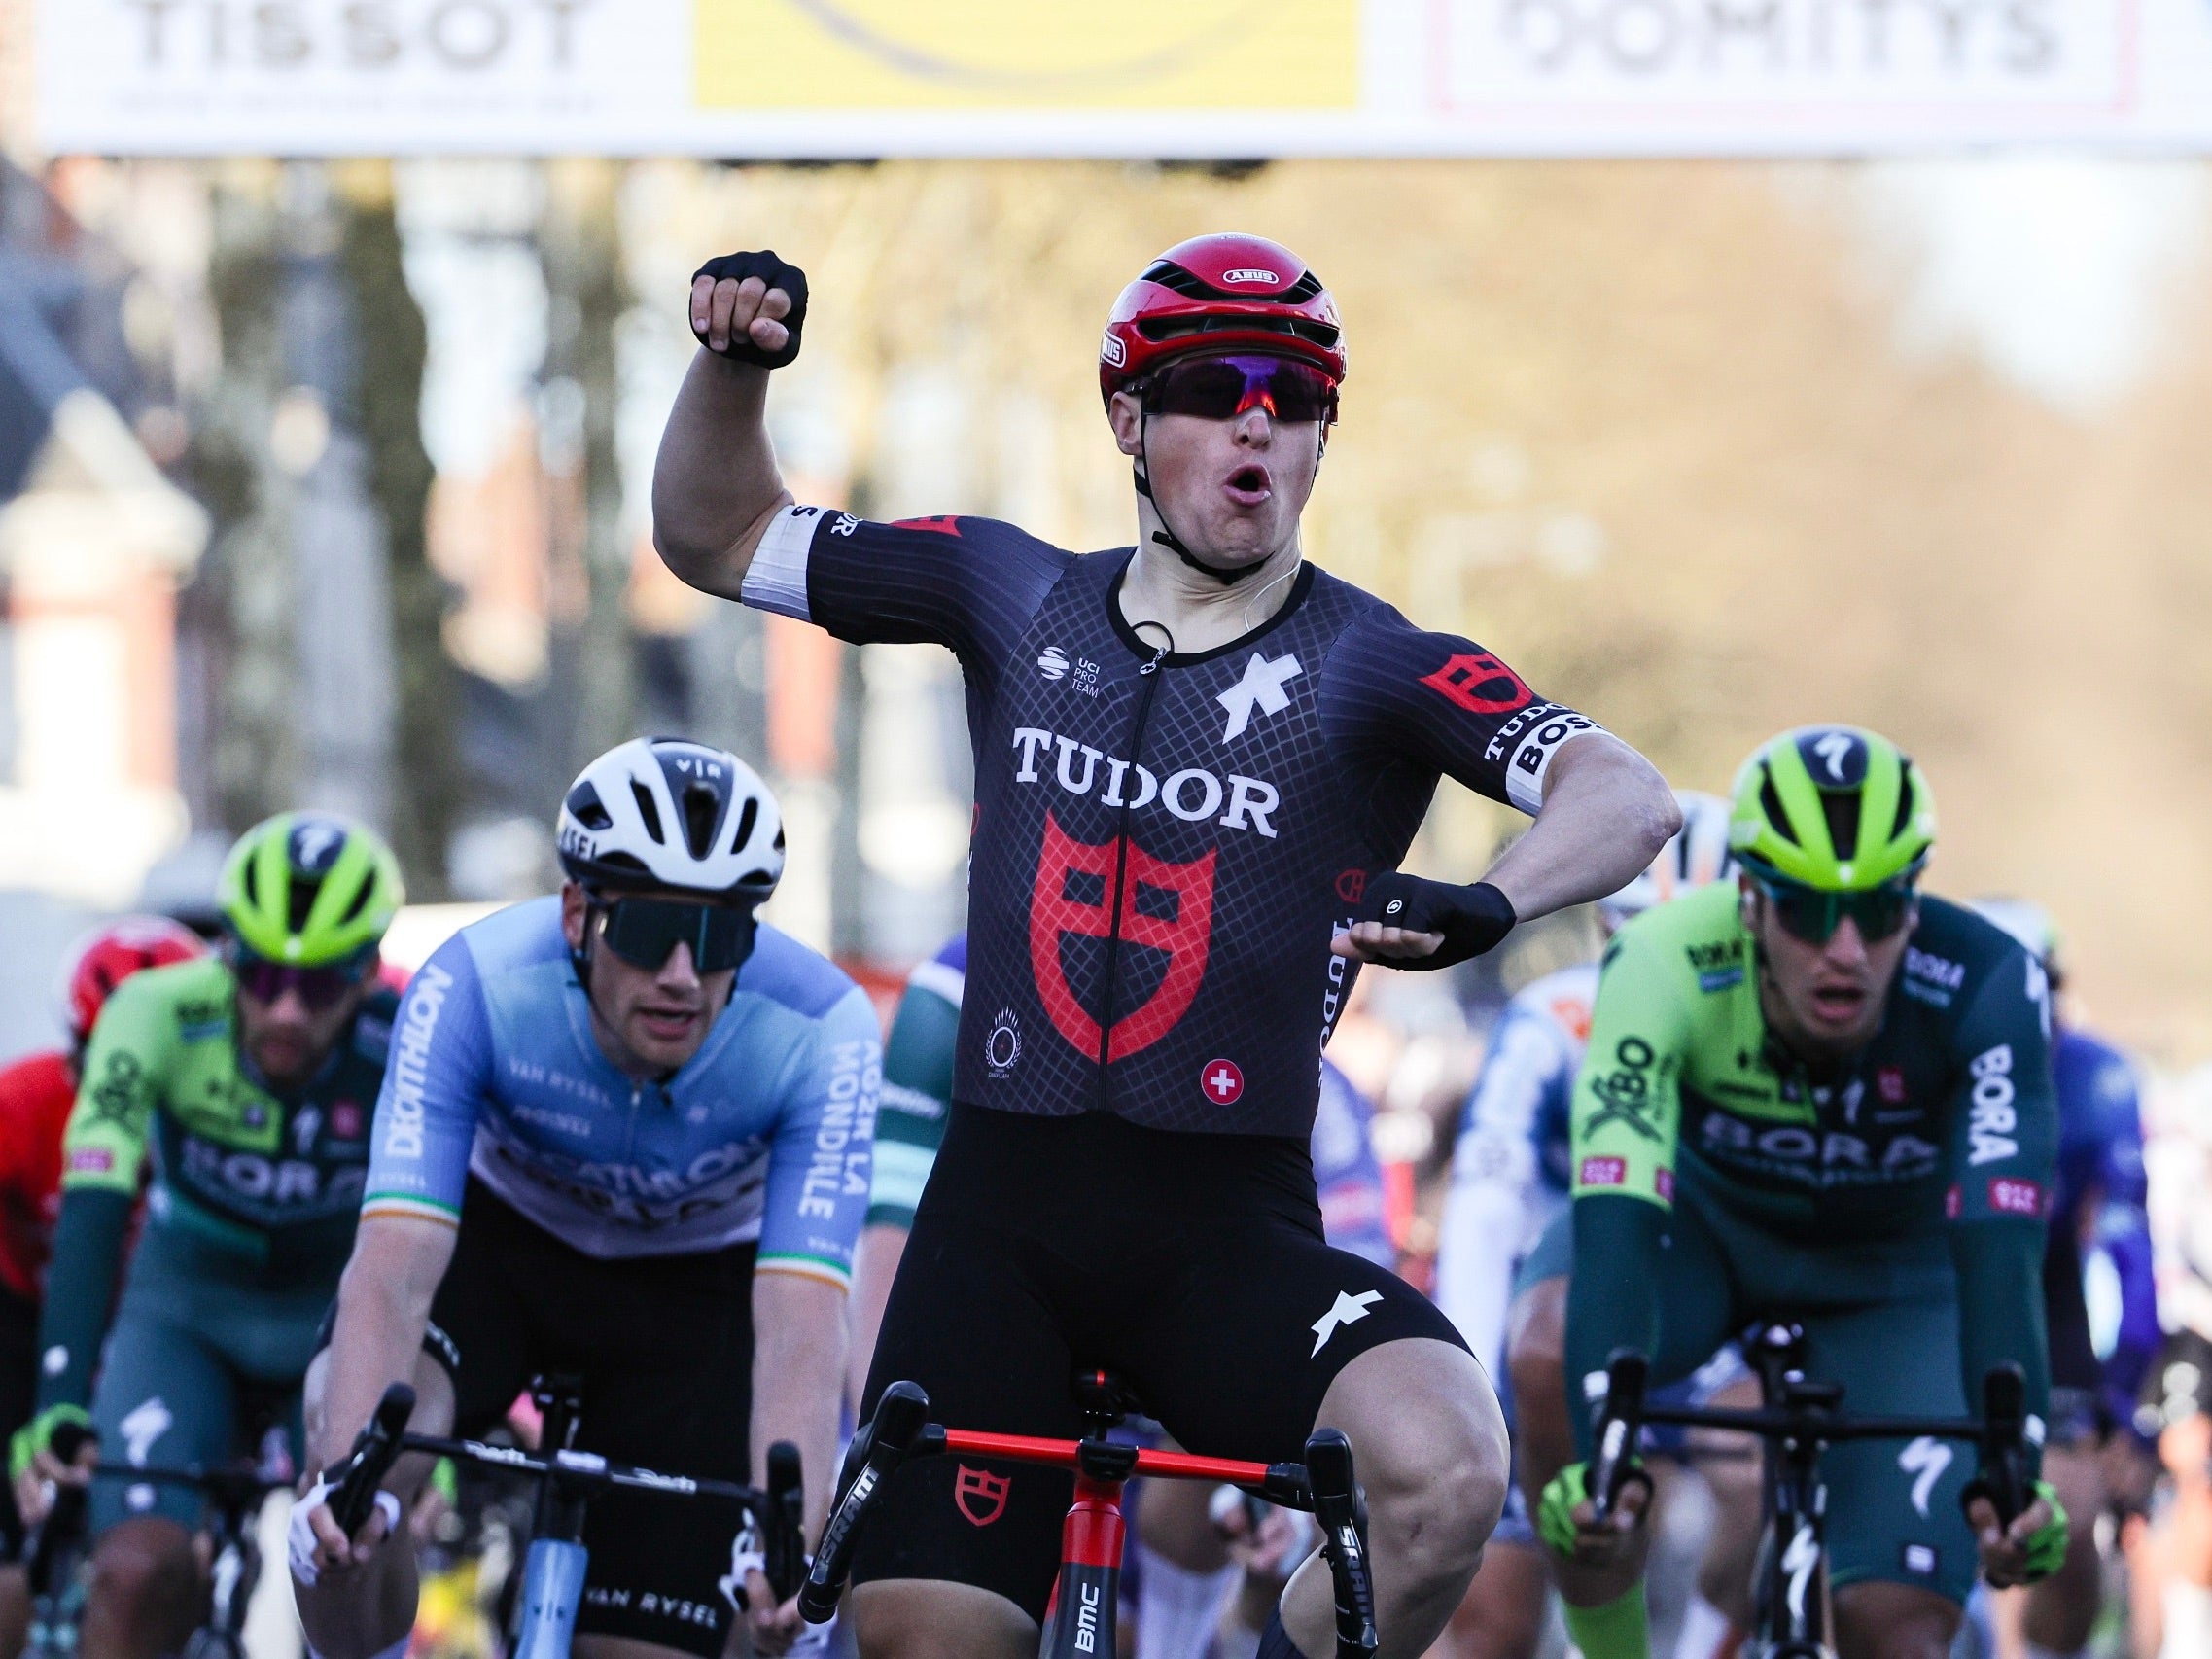 BMC |Tudor Pro Cycling scores first WorldTour stage victory in Paris-Nice